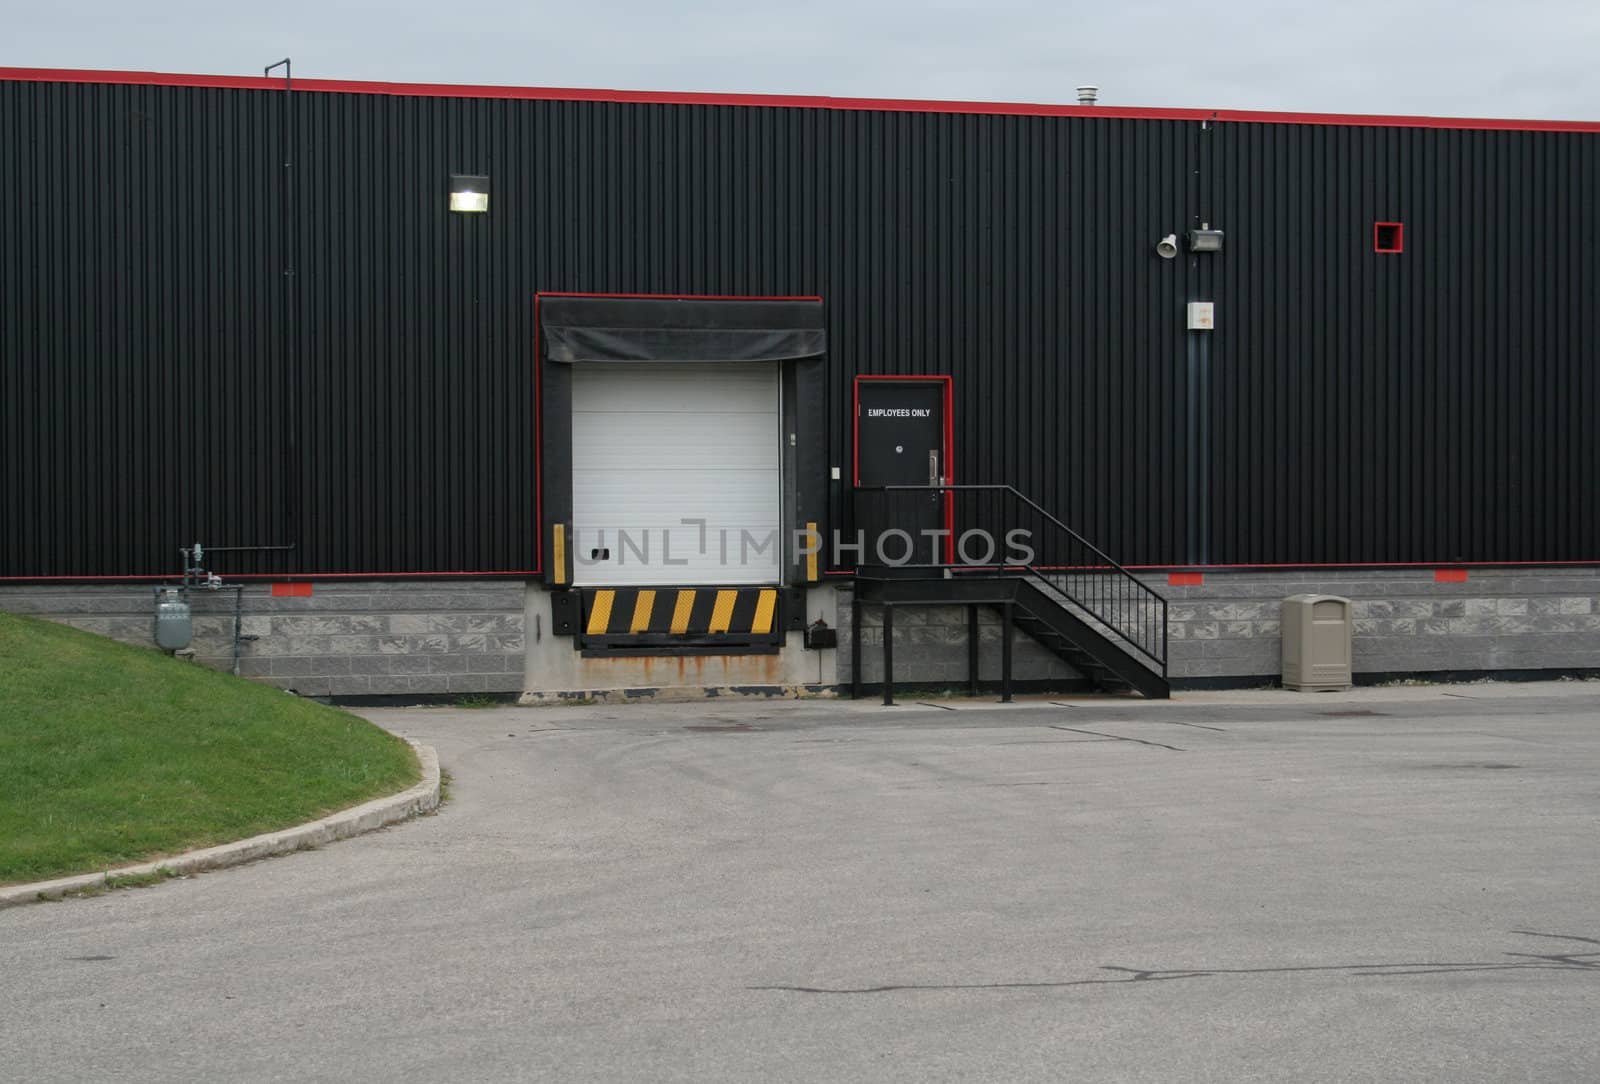 The exterior loading dock of an industrial warehouse.
